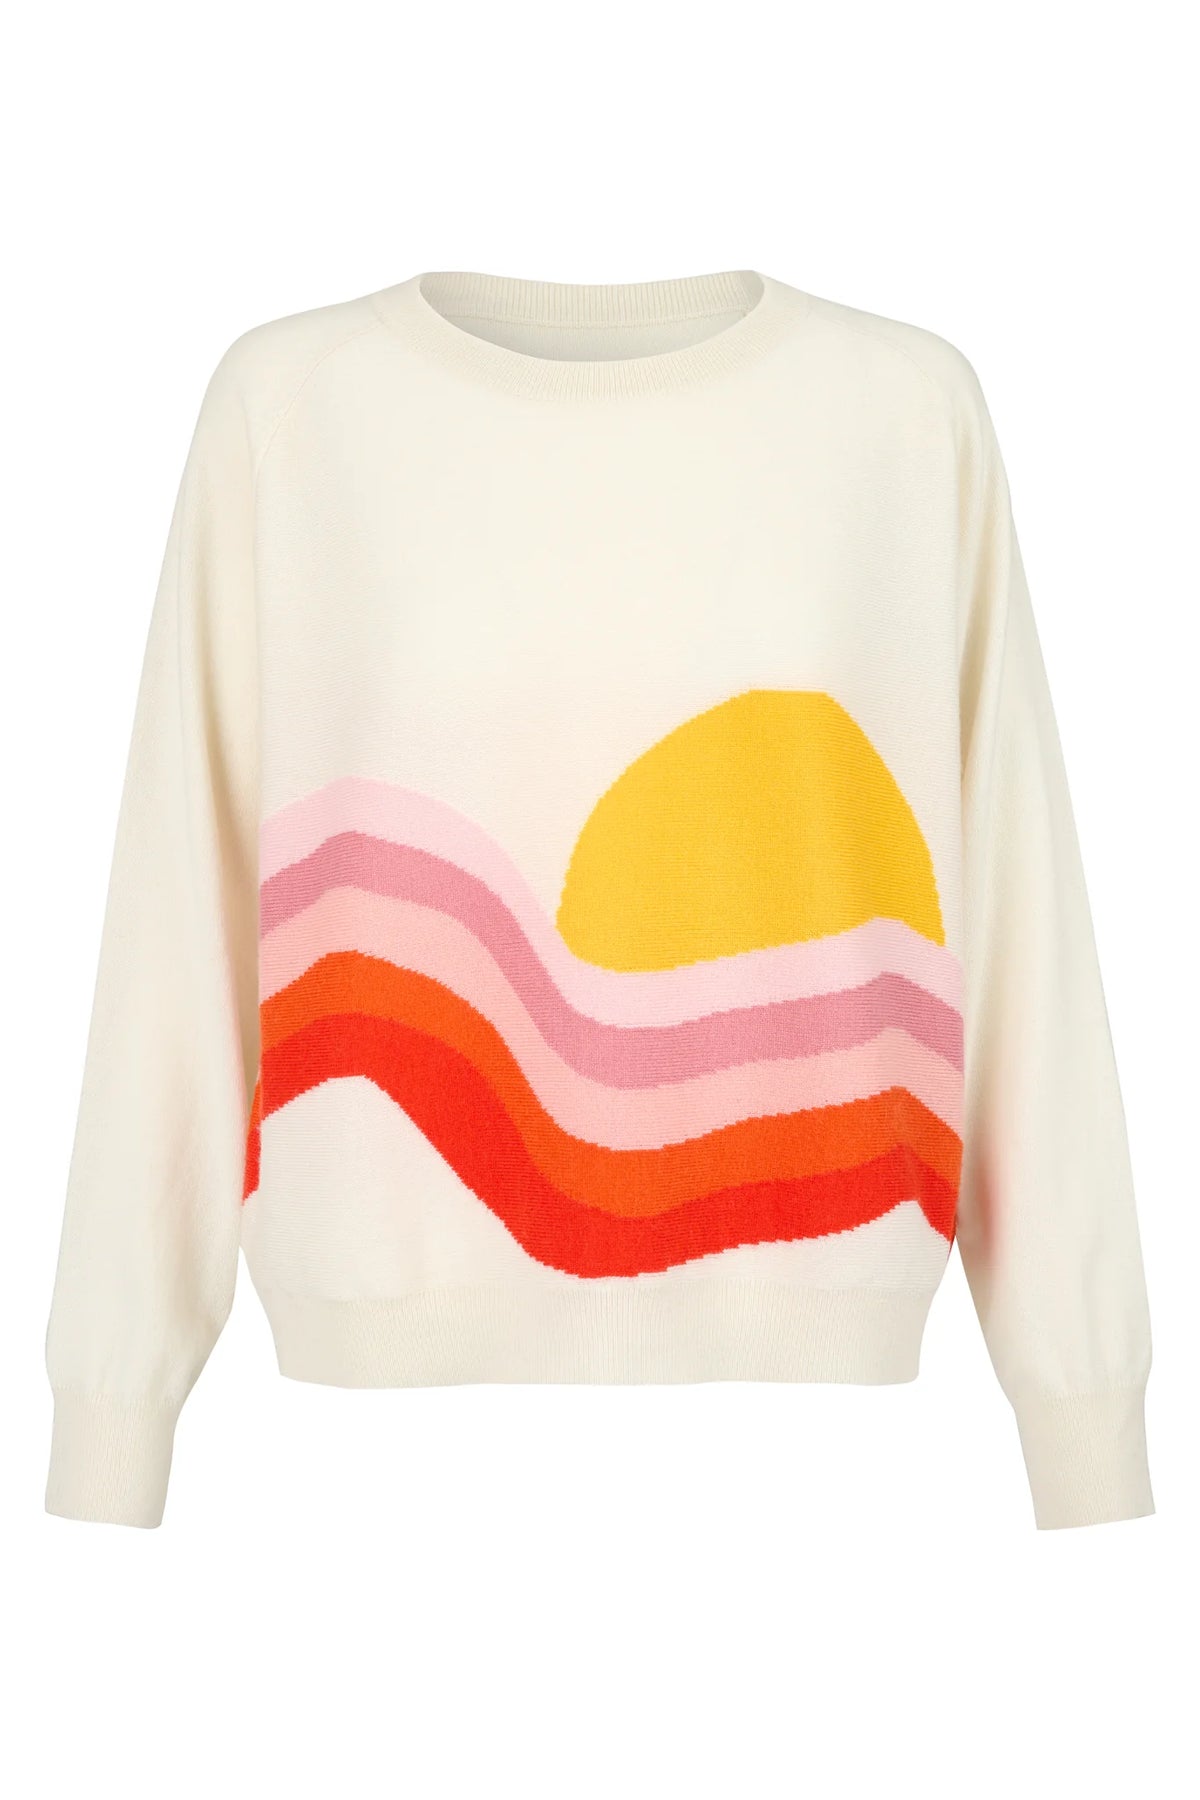 Cream crew neck jumper with orange and pink wave design and yellow sun on front